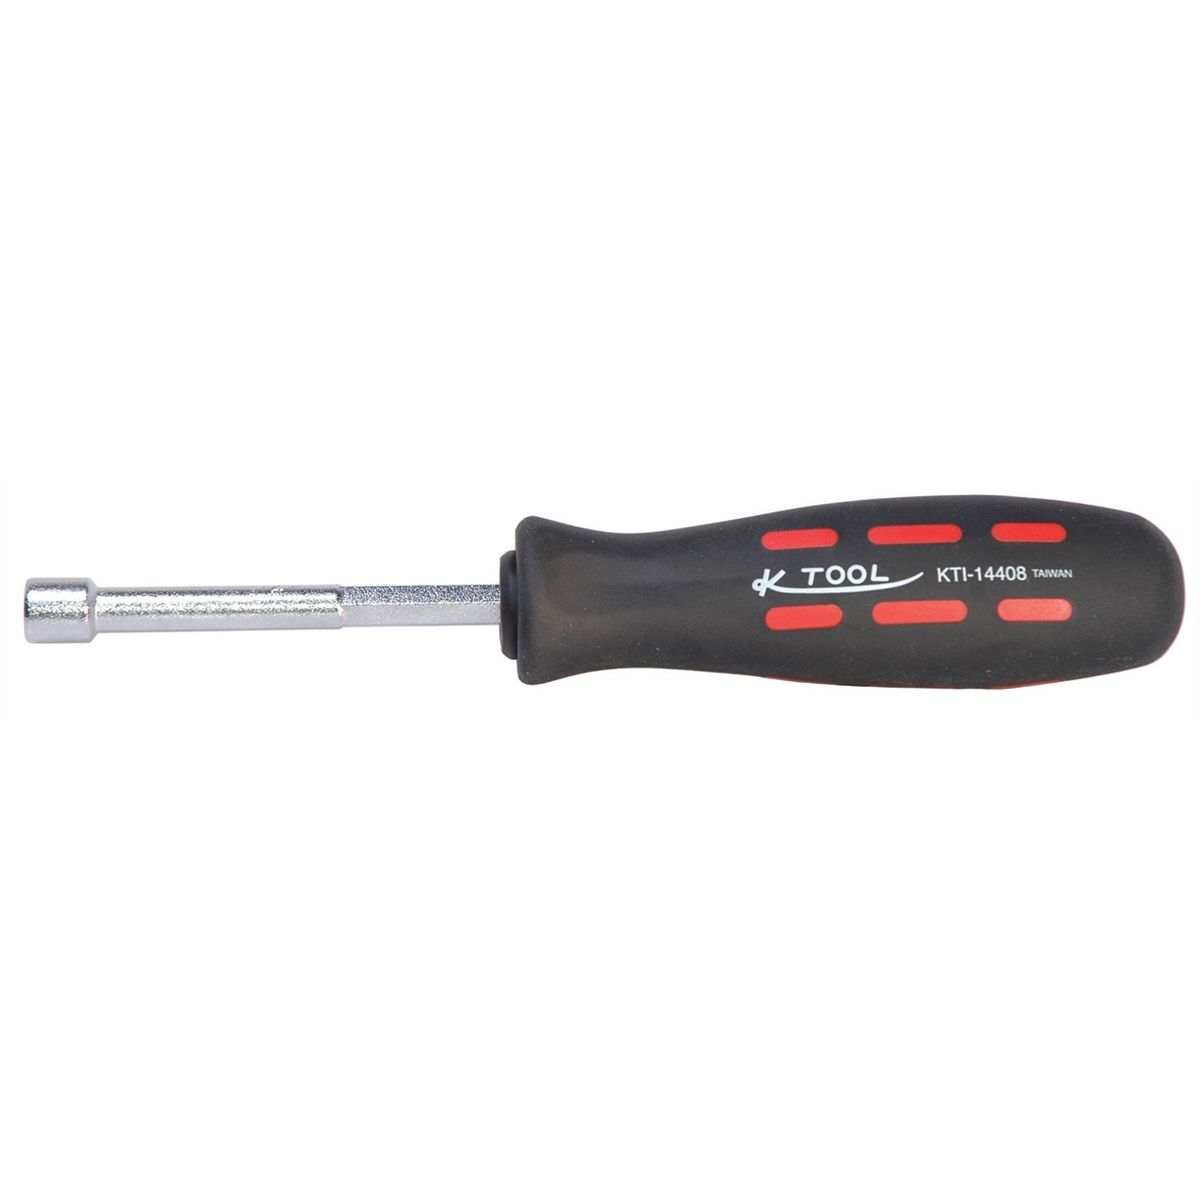 1/4" x 3" Fractional Nut Driver